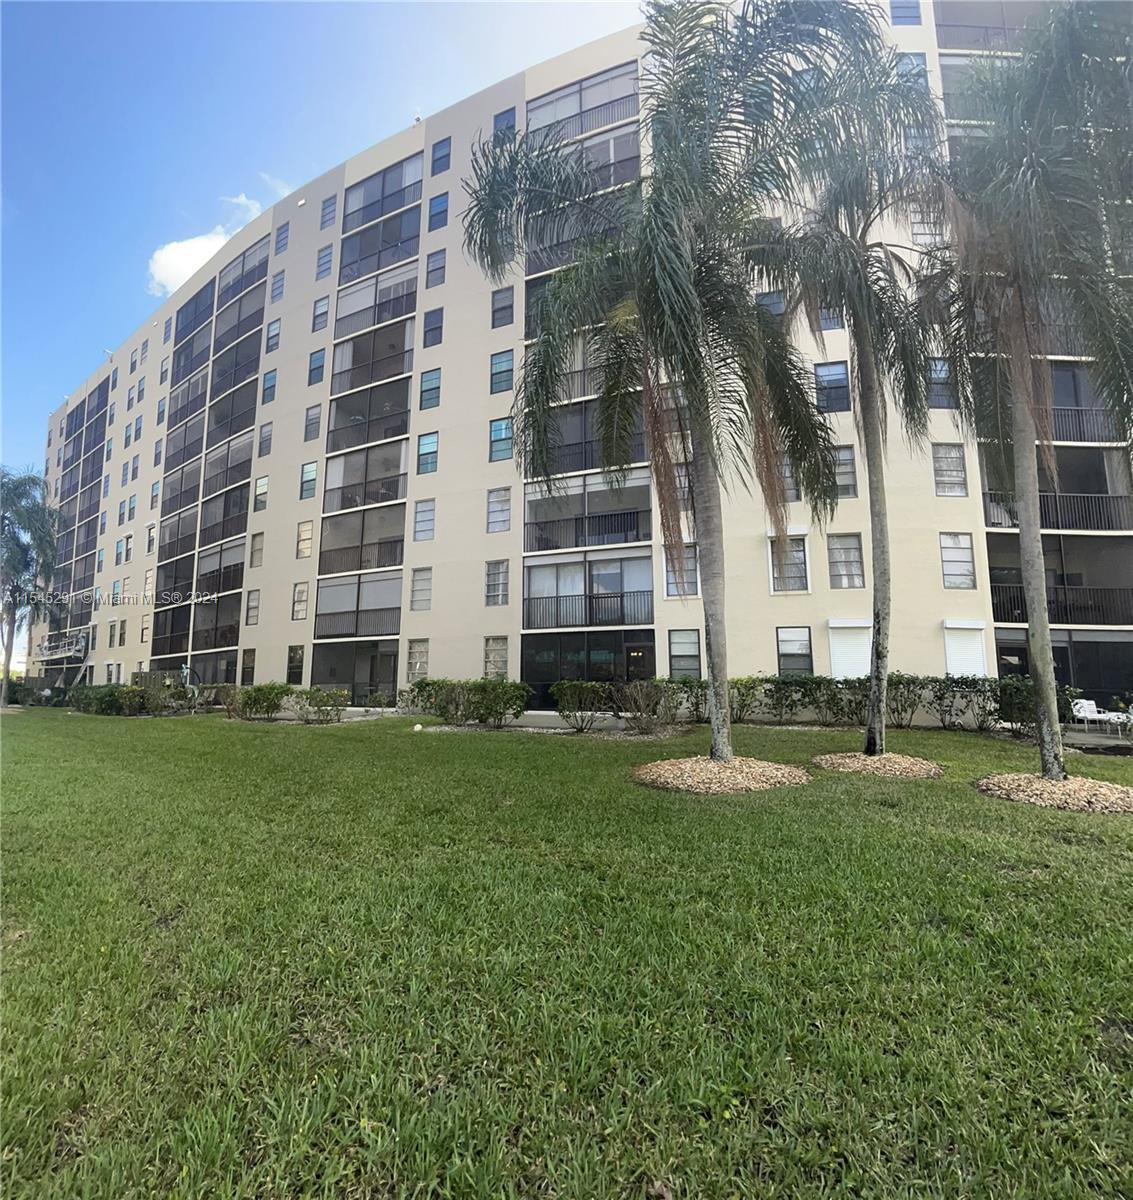 Photo of 2205 S Cypress Bend Dr #406 in Pompano Beach, FL